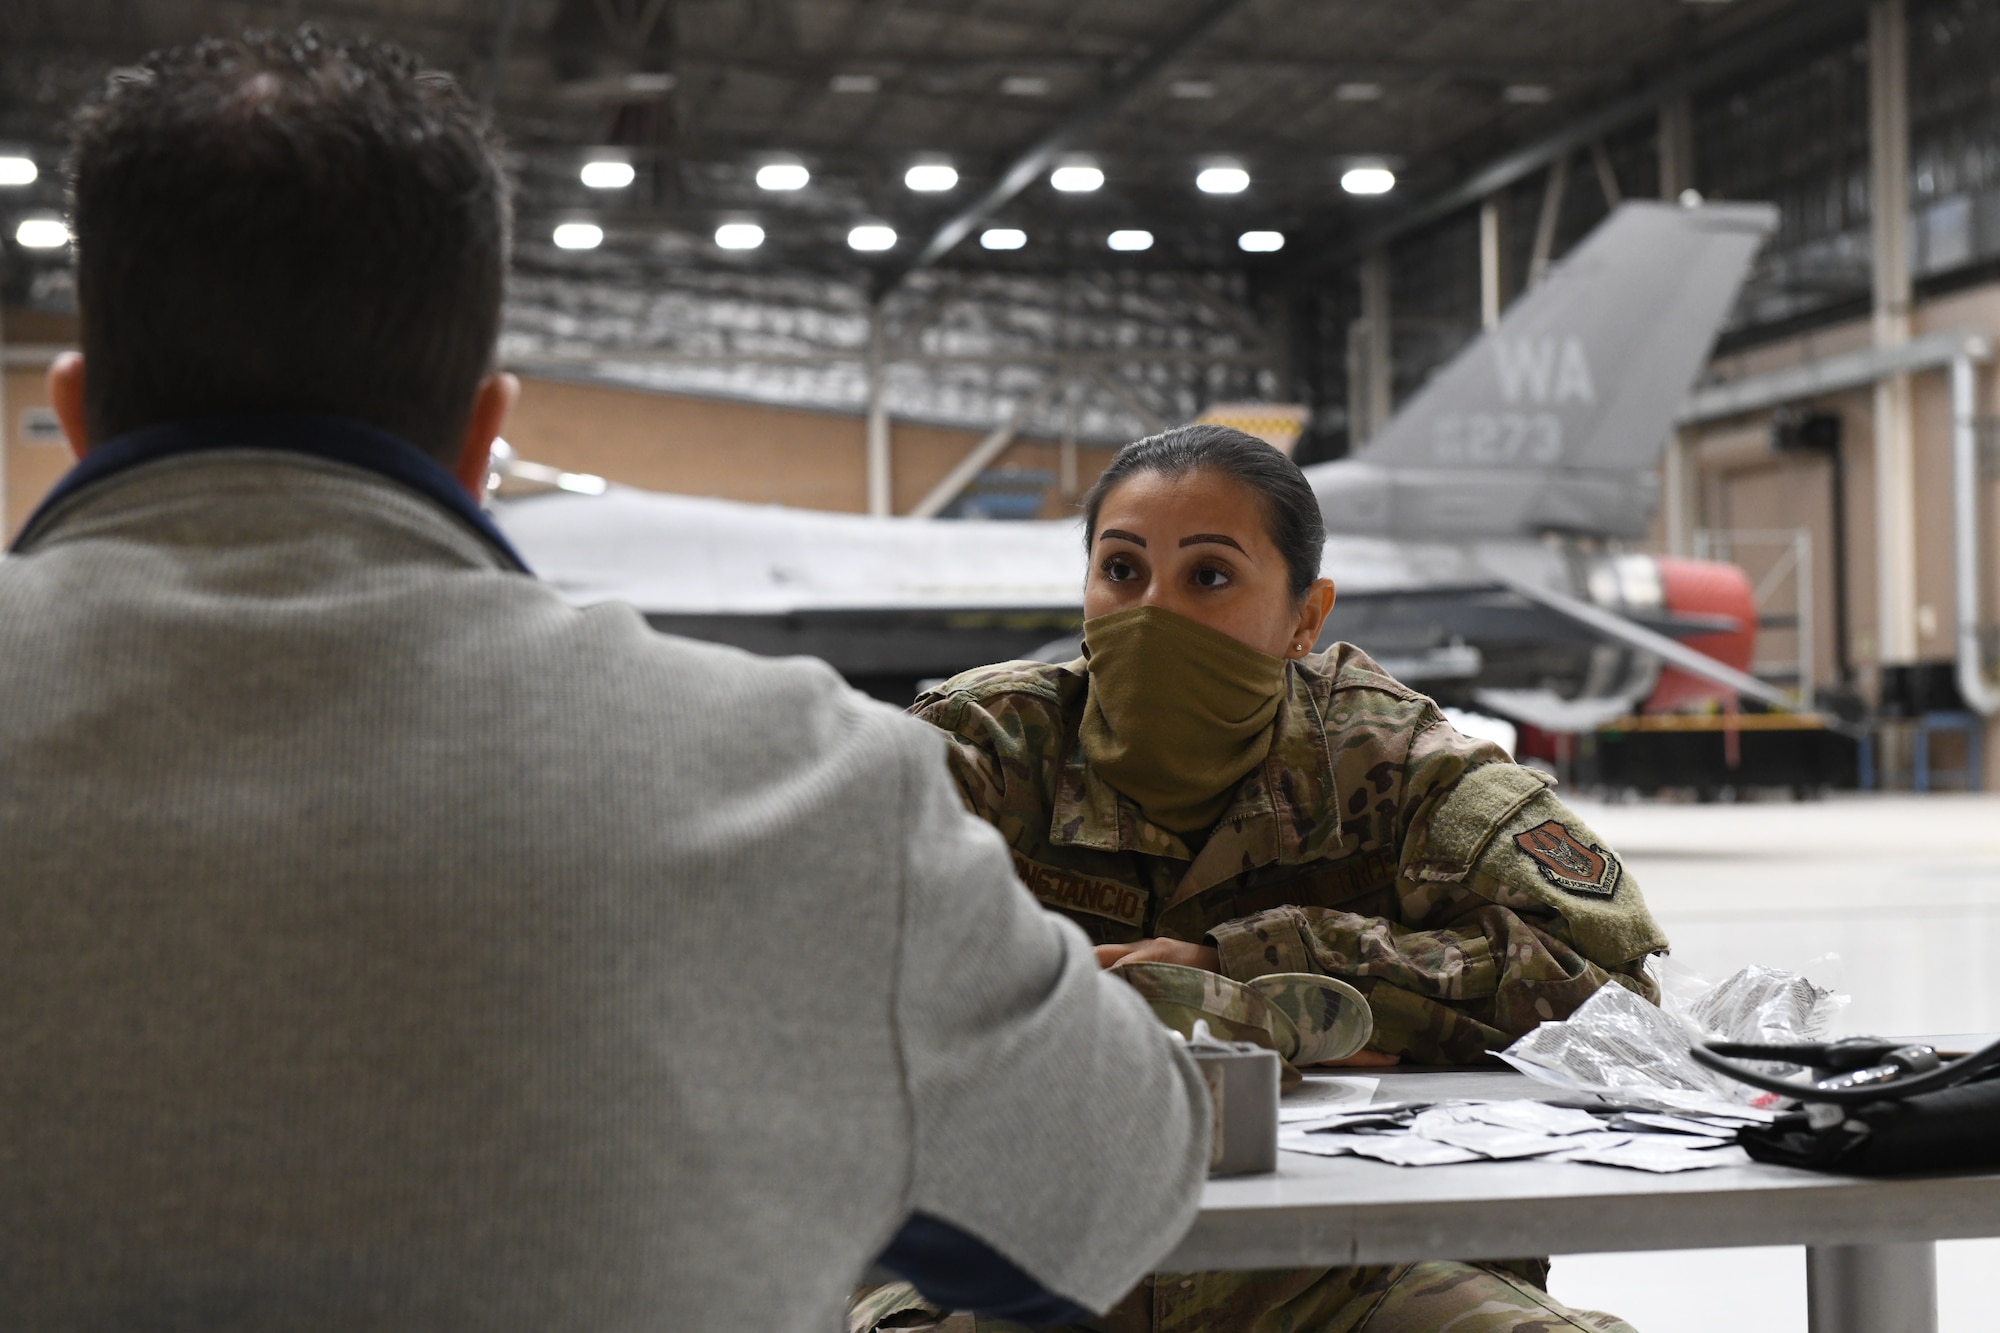 Tech. Sgt. Olivia Constancio, 926th Force Support Squadron services specialist, gets her physical health assessment done by Logistics Health Incorporated during the November Unit Training Assembly, Nov. 7, Nellis Air Force Base, Nev. (U.S. Air Force Photo by Senior Airman Brett Clashman)